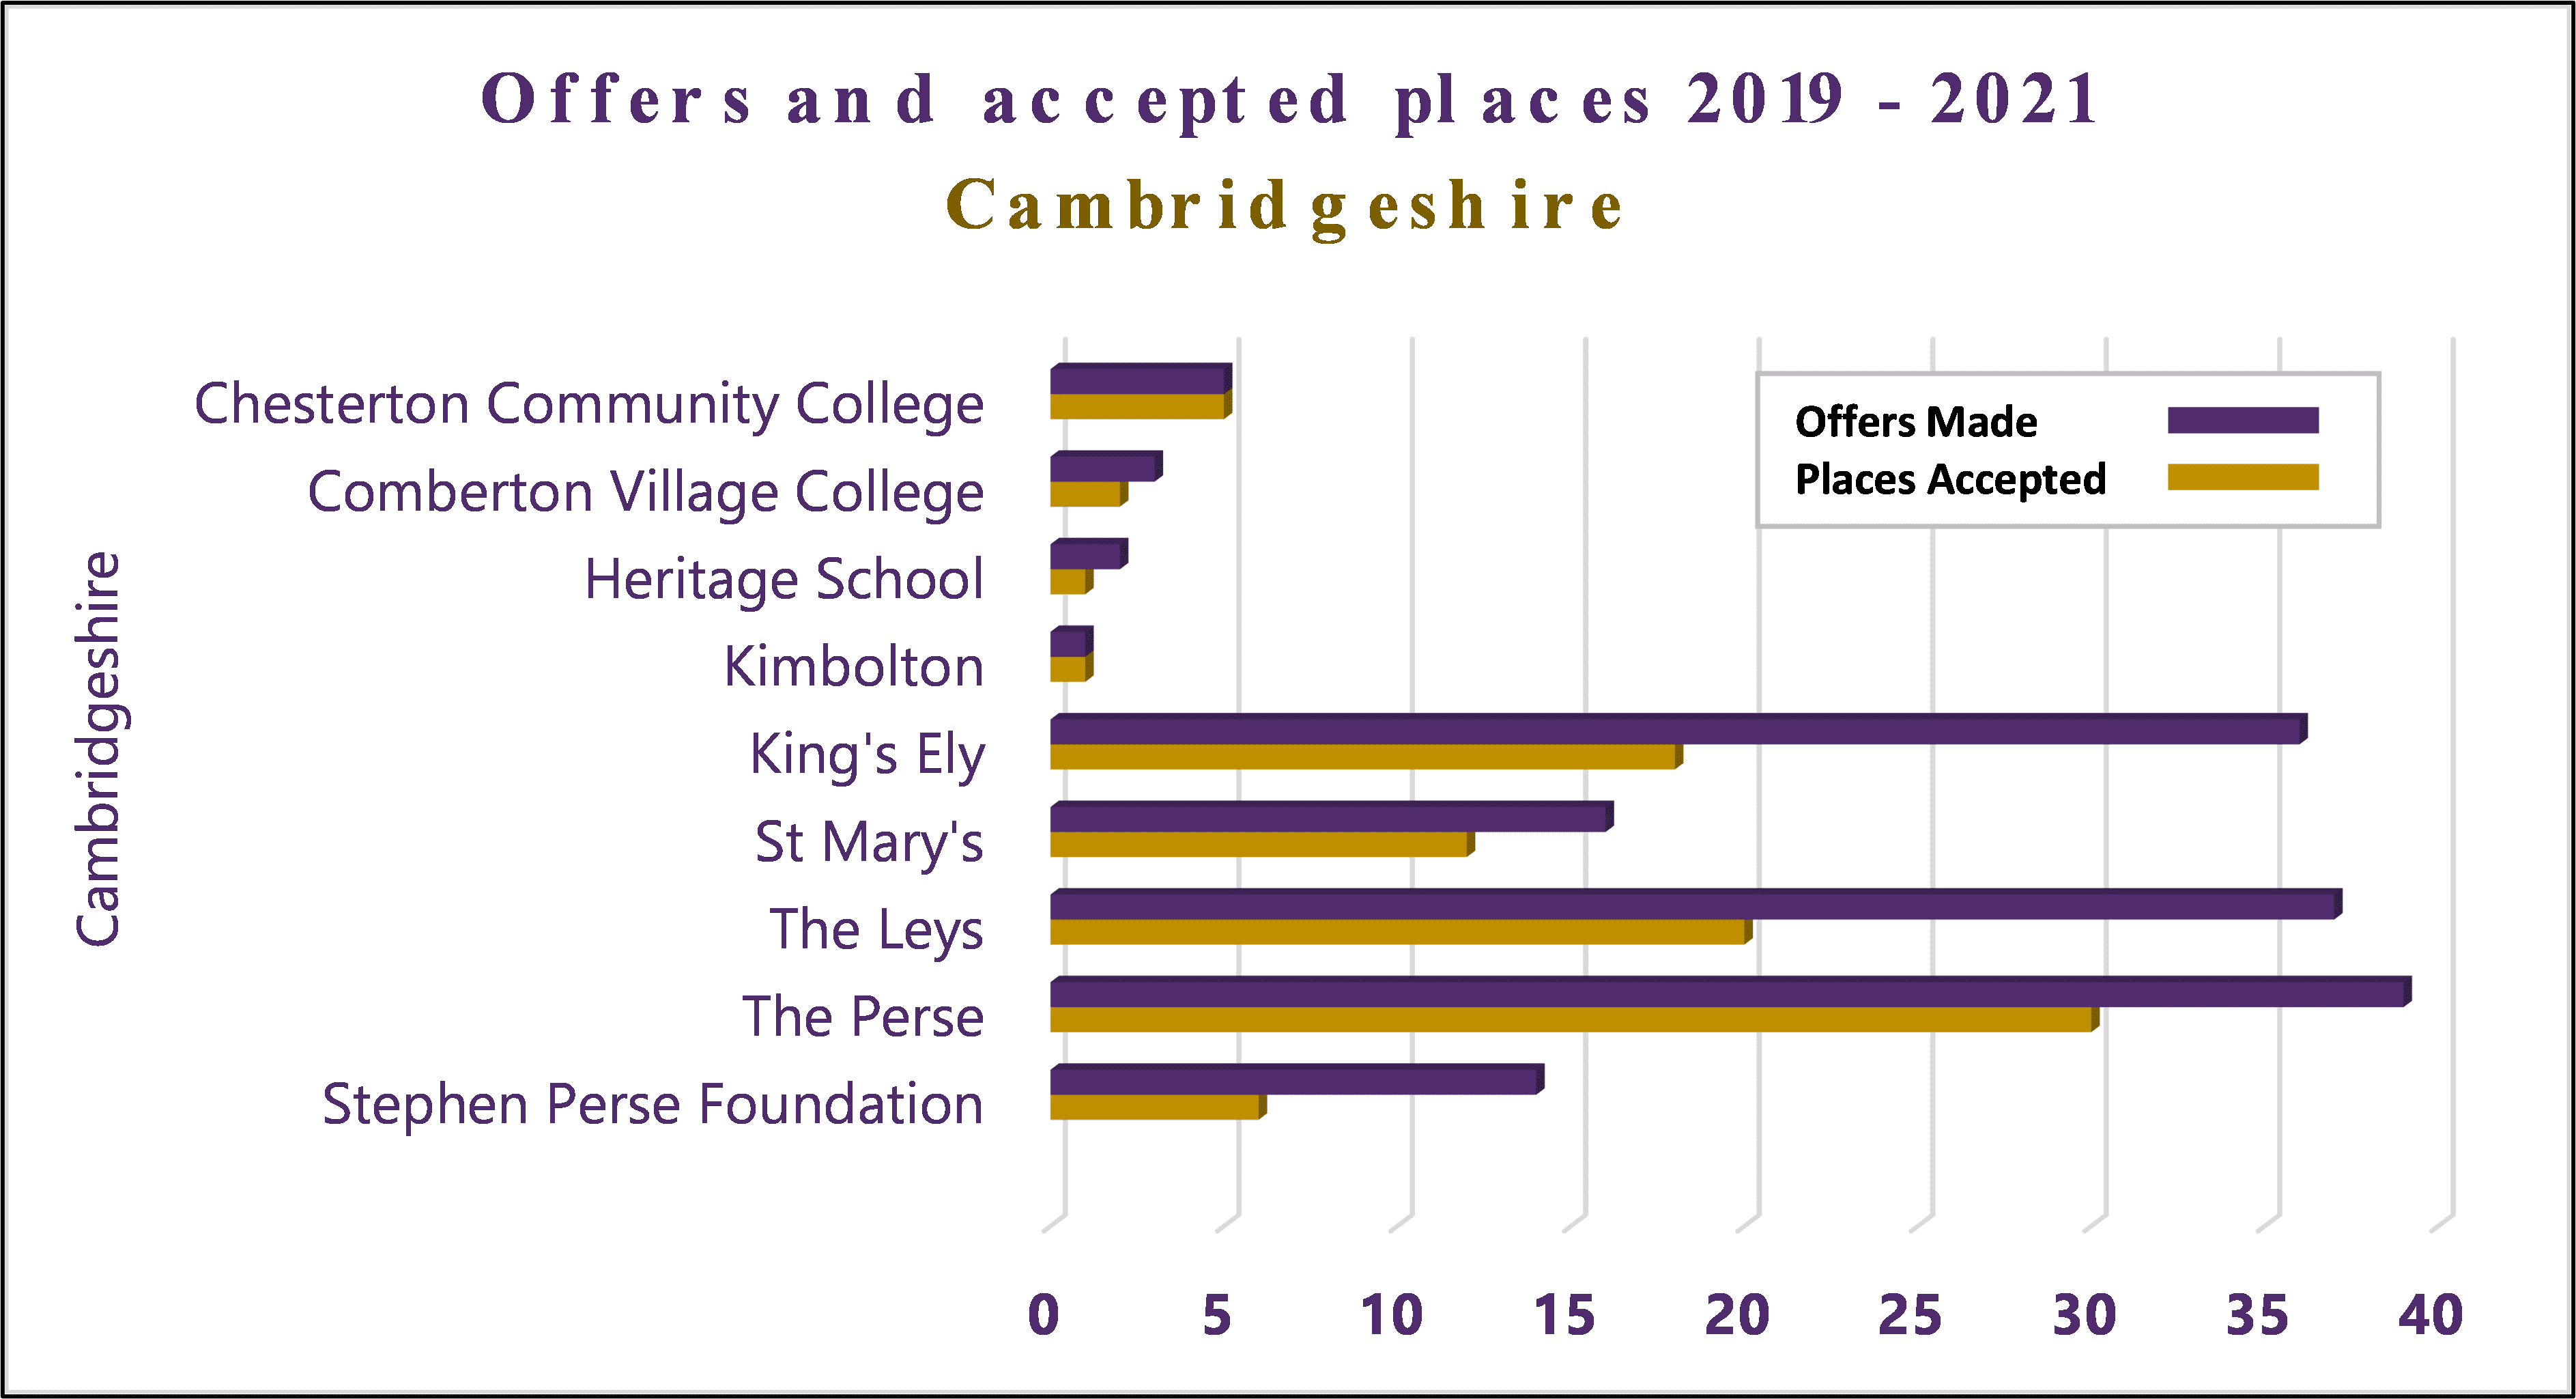 Graphic of the offers and accepted places 2019-2021 in Cambridgeshire